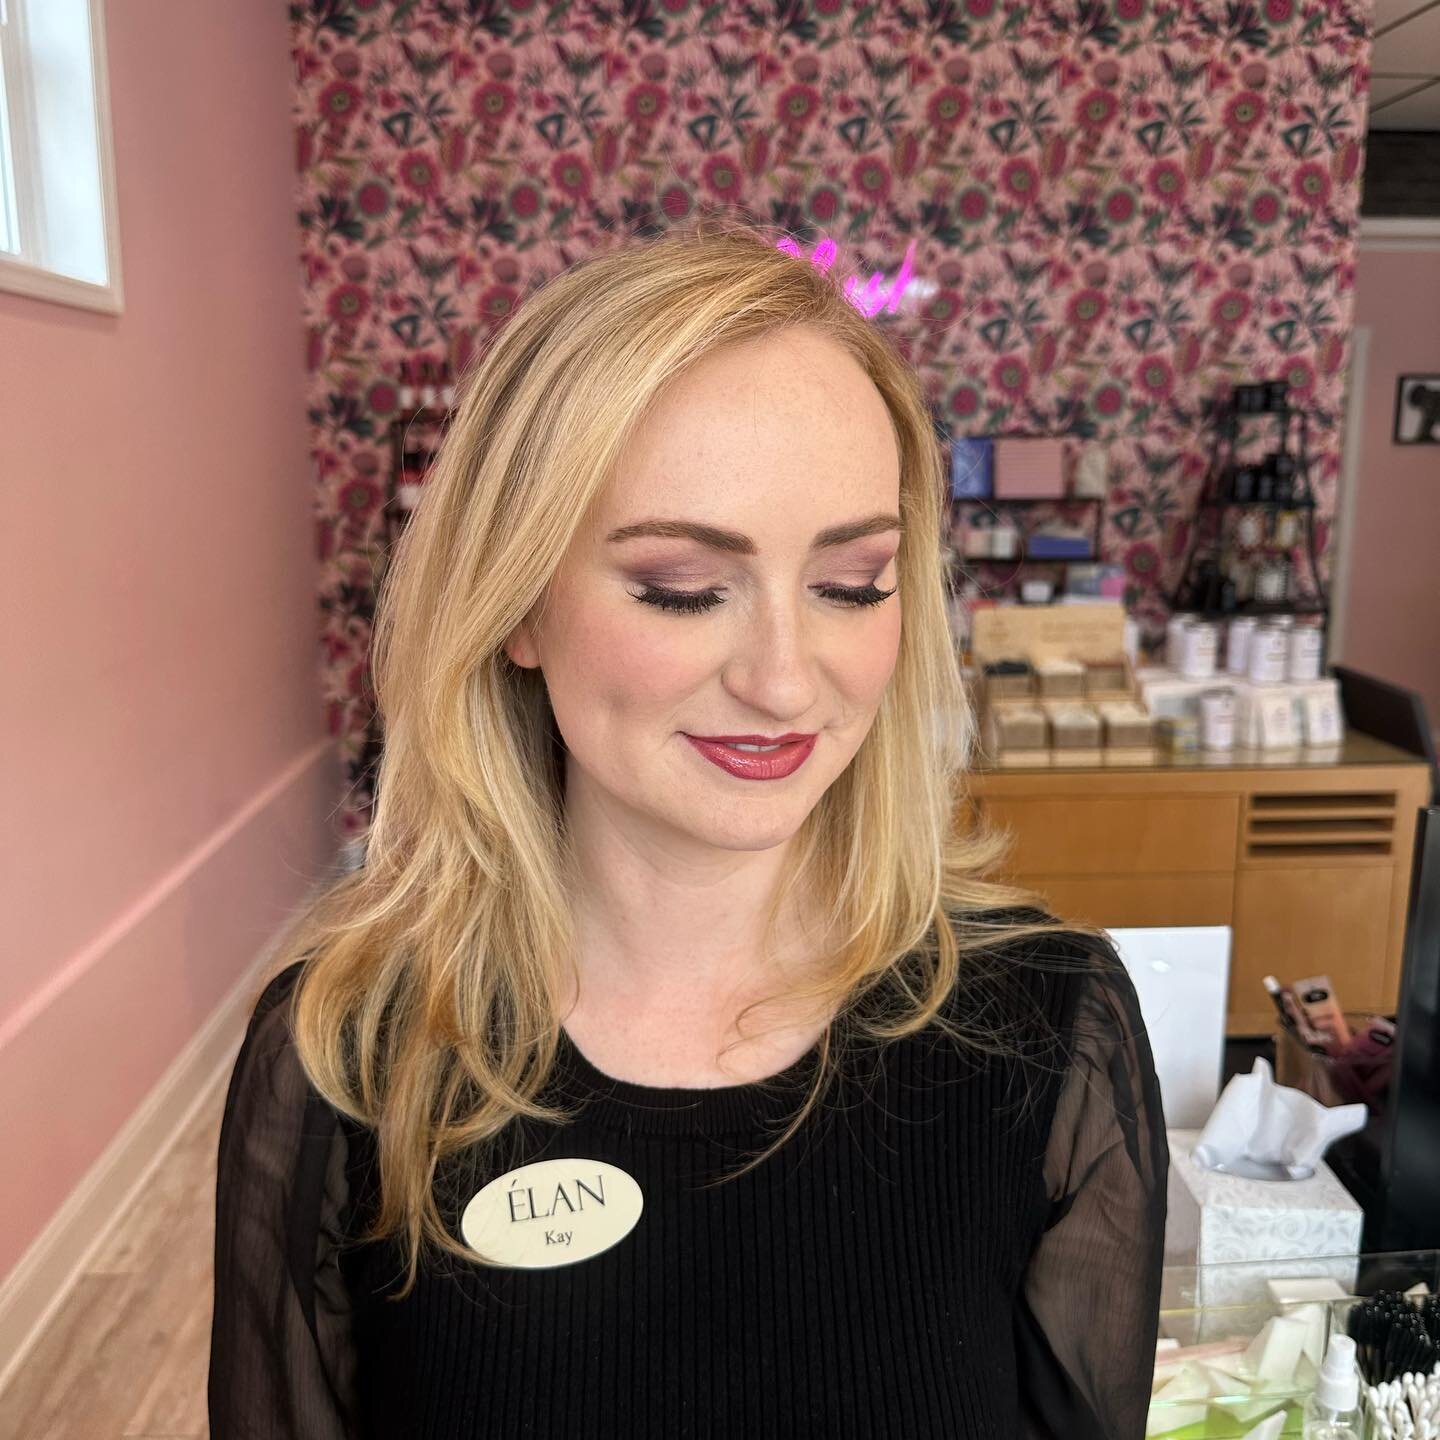 Make-up application with lashes for one of our own @hair_by_kayketch for @elanhairstudio by Diana 🩷

#makeupstudio #beautyboutique #springlakenj #monmouthcounty #promua #njbride #blushbabes🩷